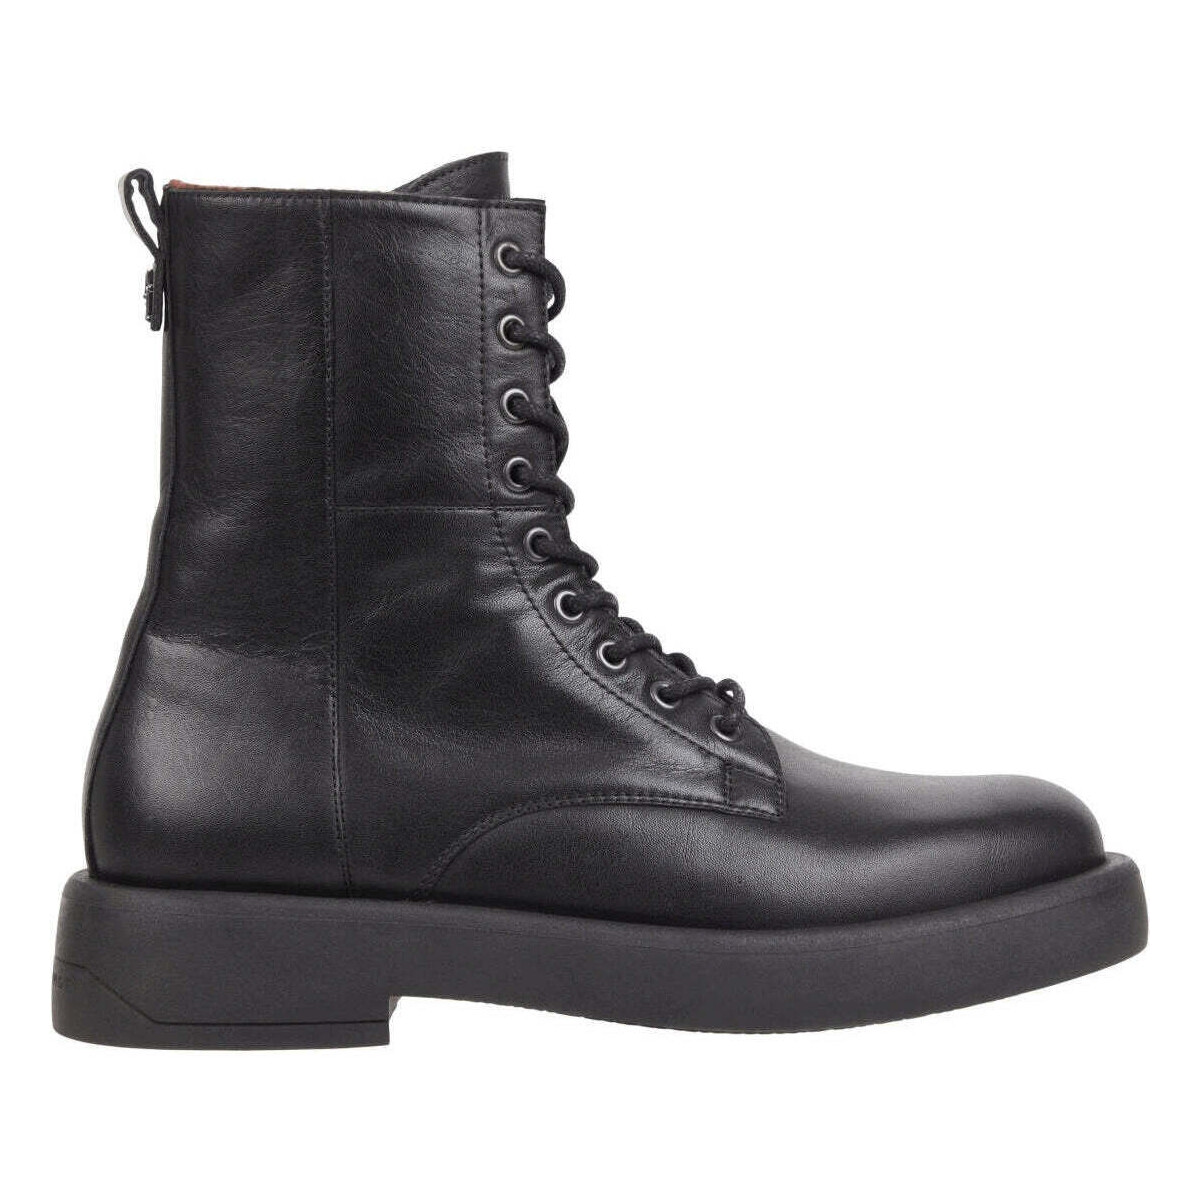 Chaussures Homme Boots Tommy Hilfiger fashion high boot Noir